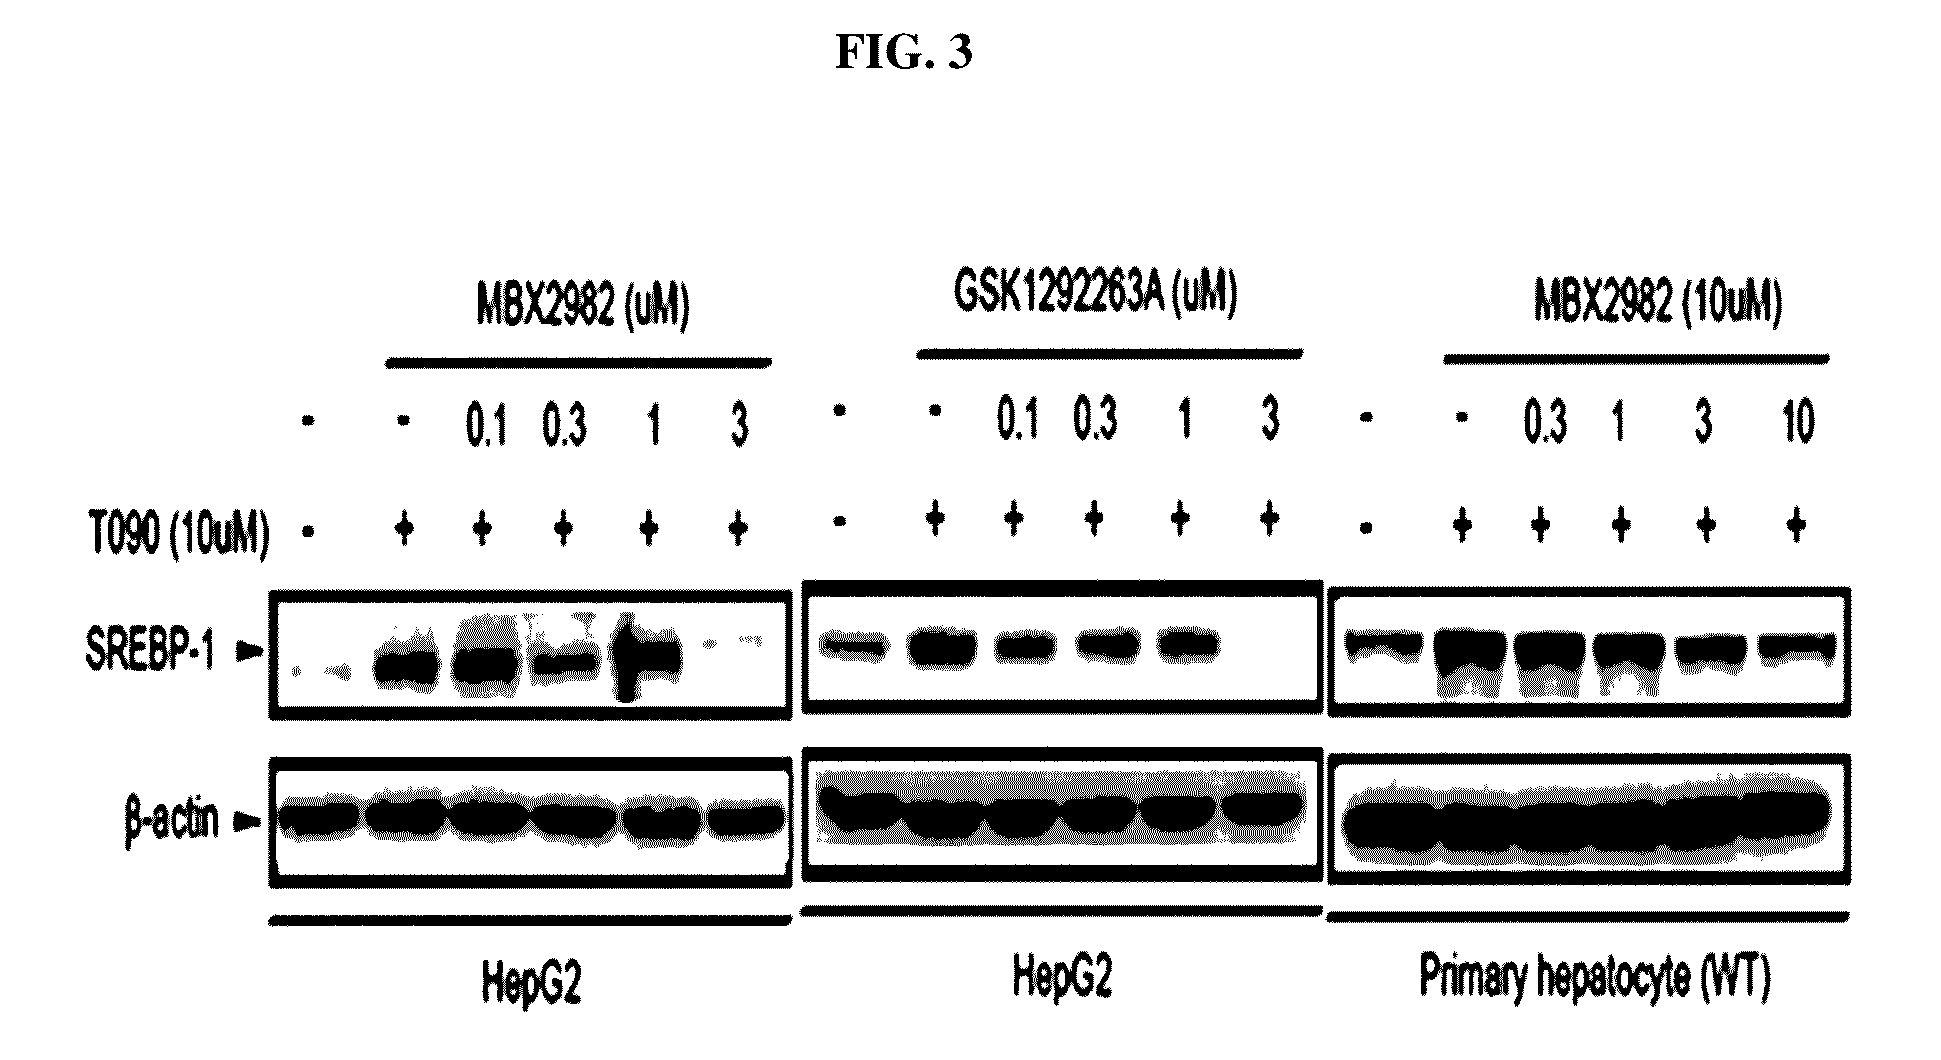 Pharmaceutical composition containing gpr119 ligand as active ingredient for preventing or treating non-alcoholic fatty liver disease